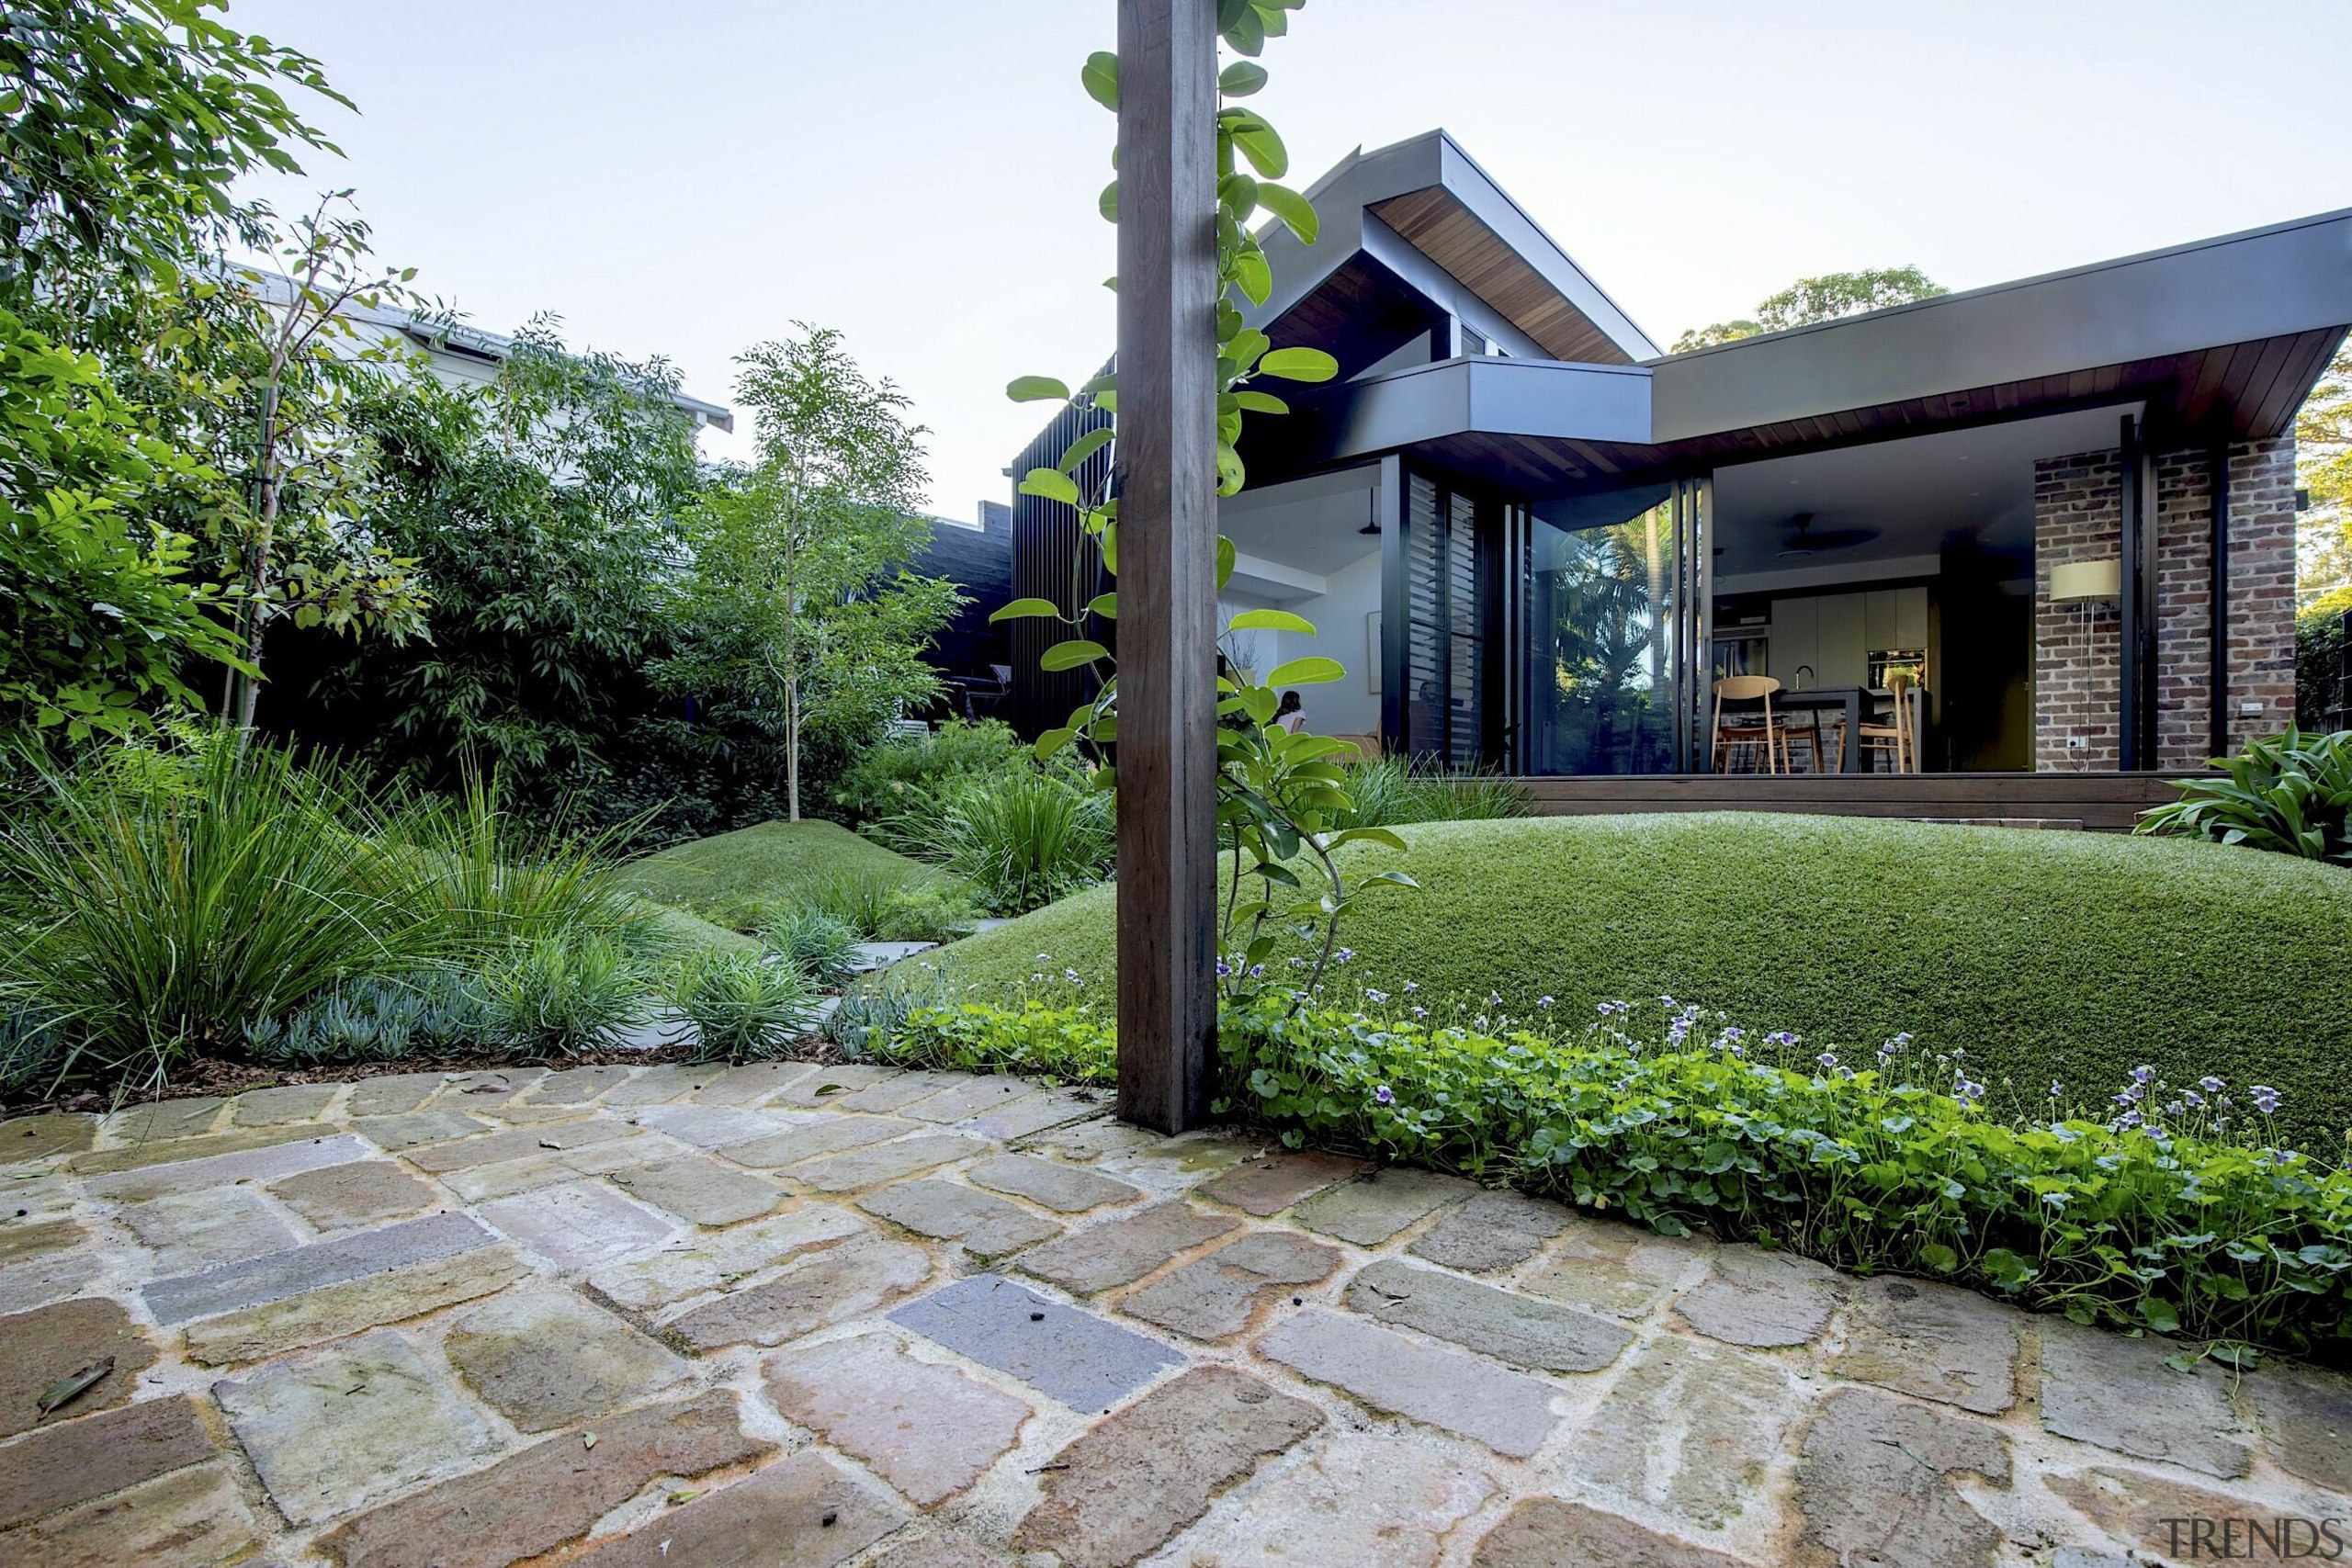 Bluestone pavers are a feature of the backyard 